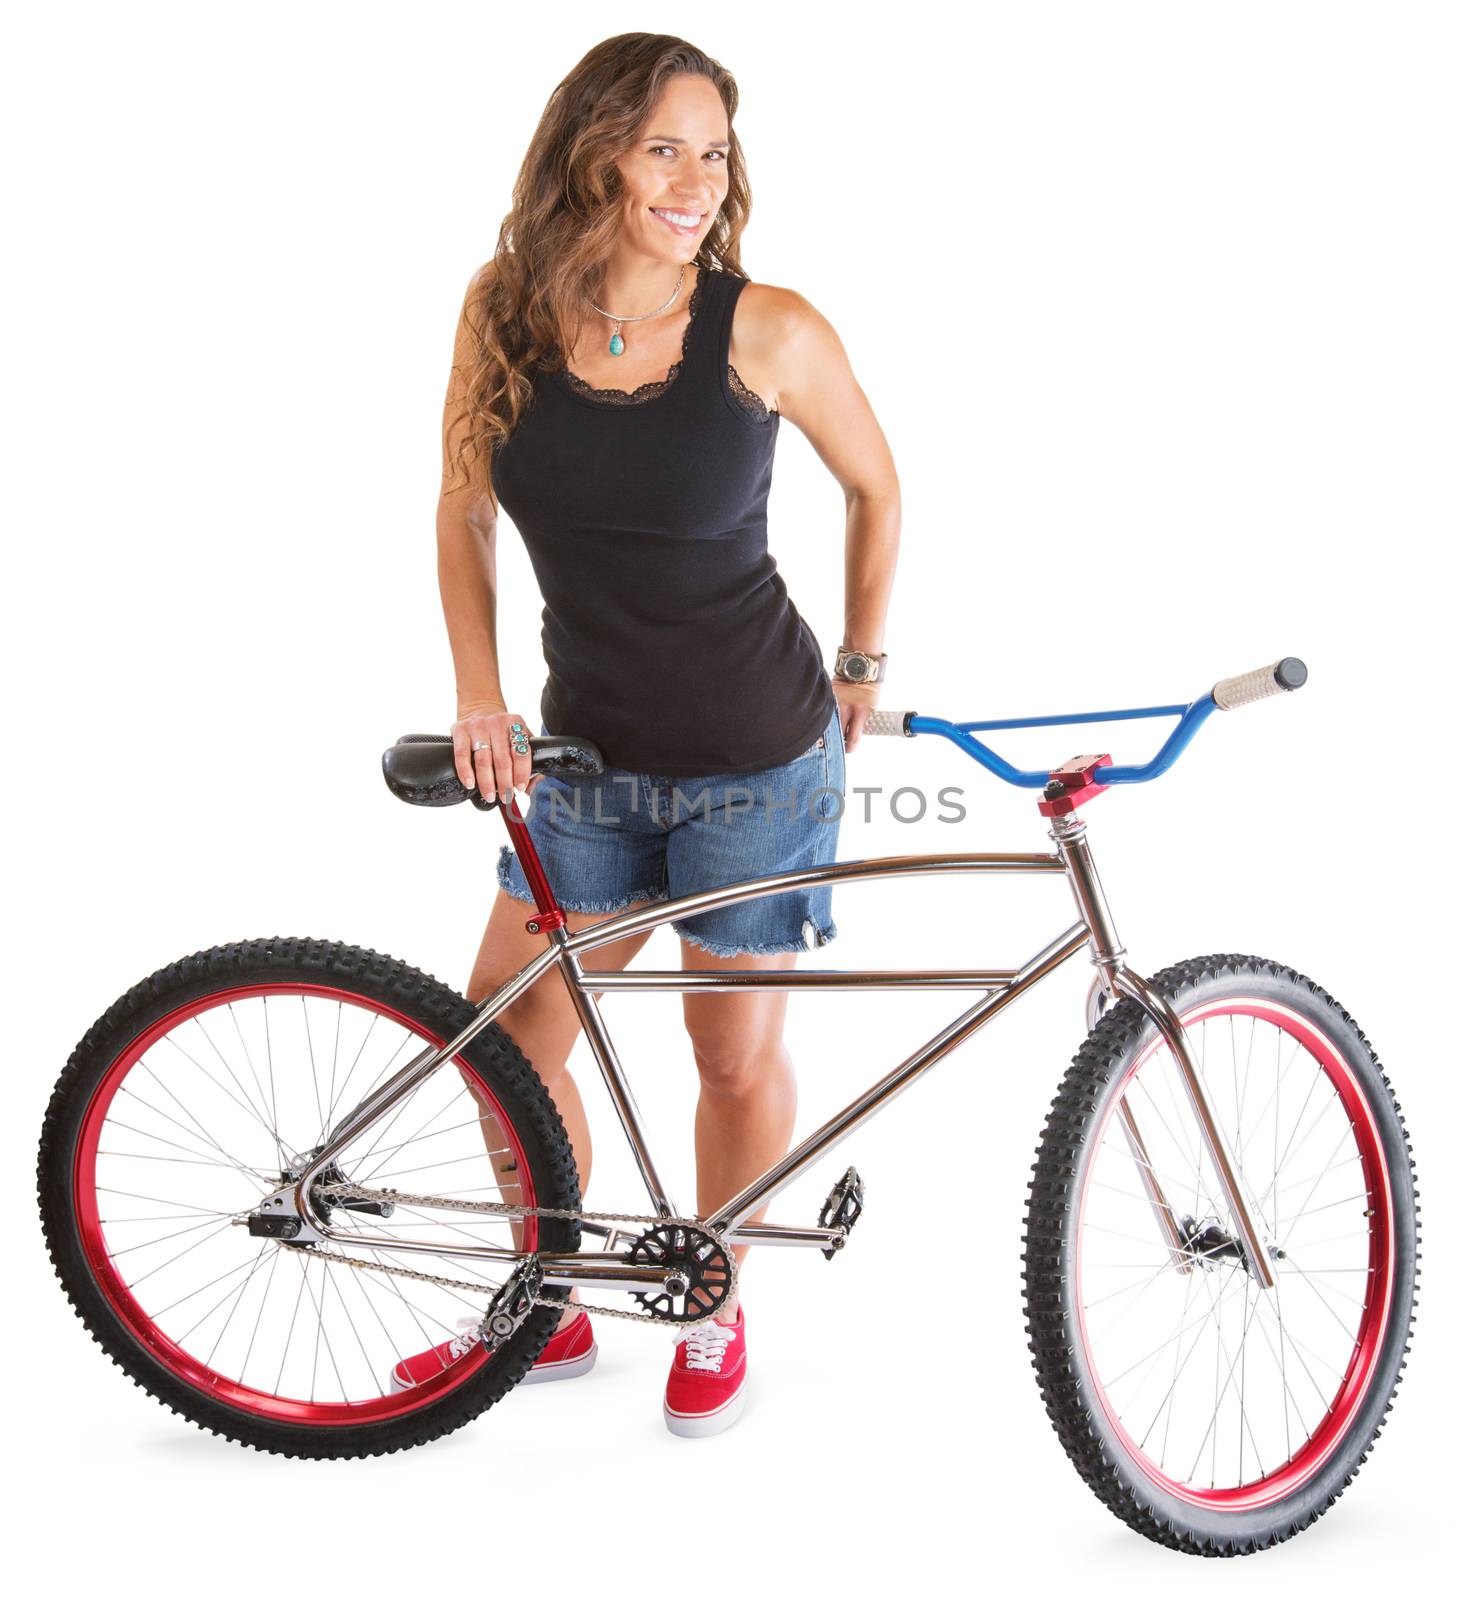 Cute Adult with Mountain Bike by Creatista